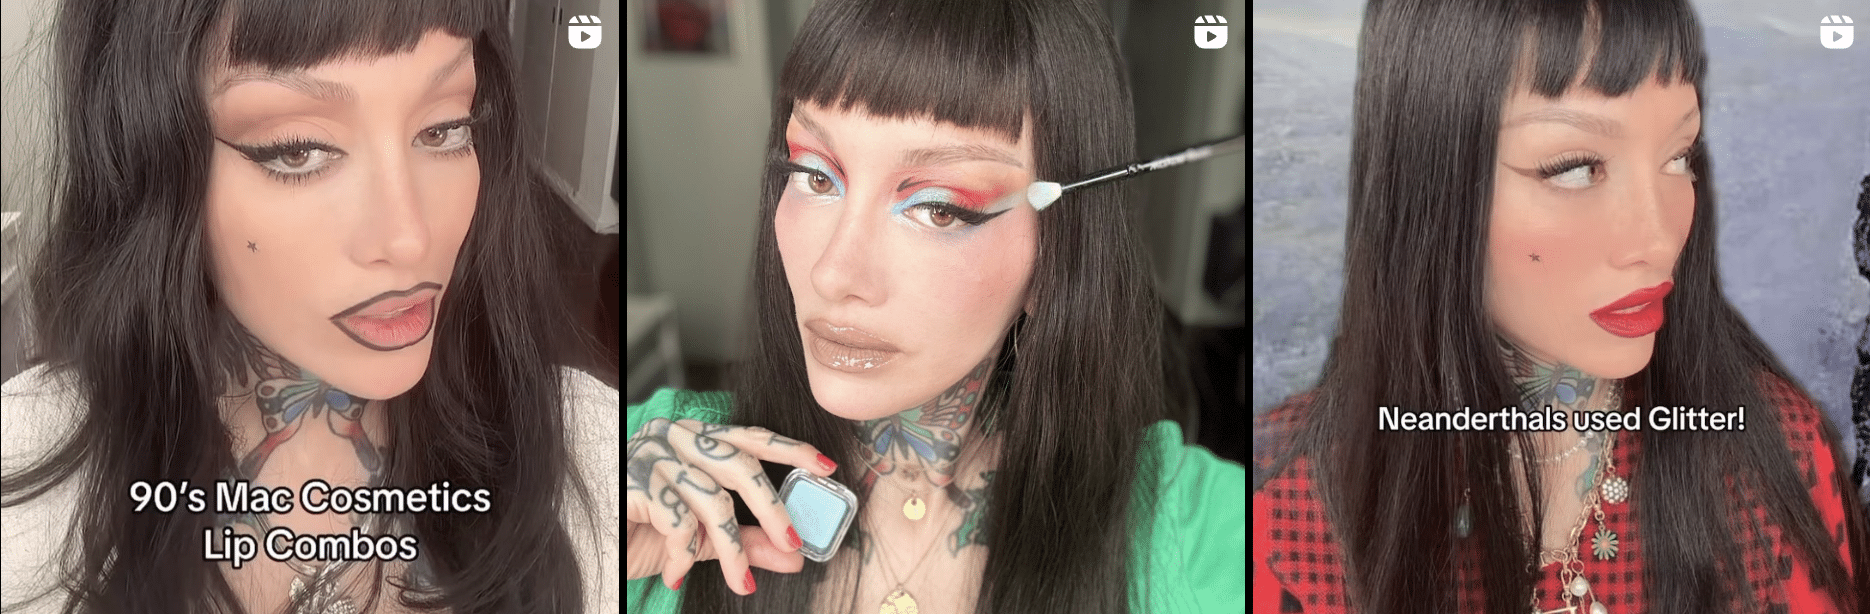 Four pictures of a woman with tattoos and makeup on her face.